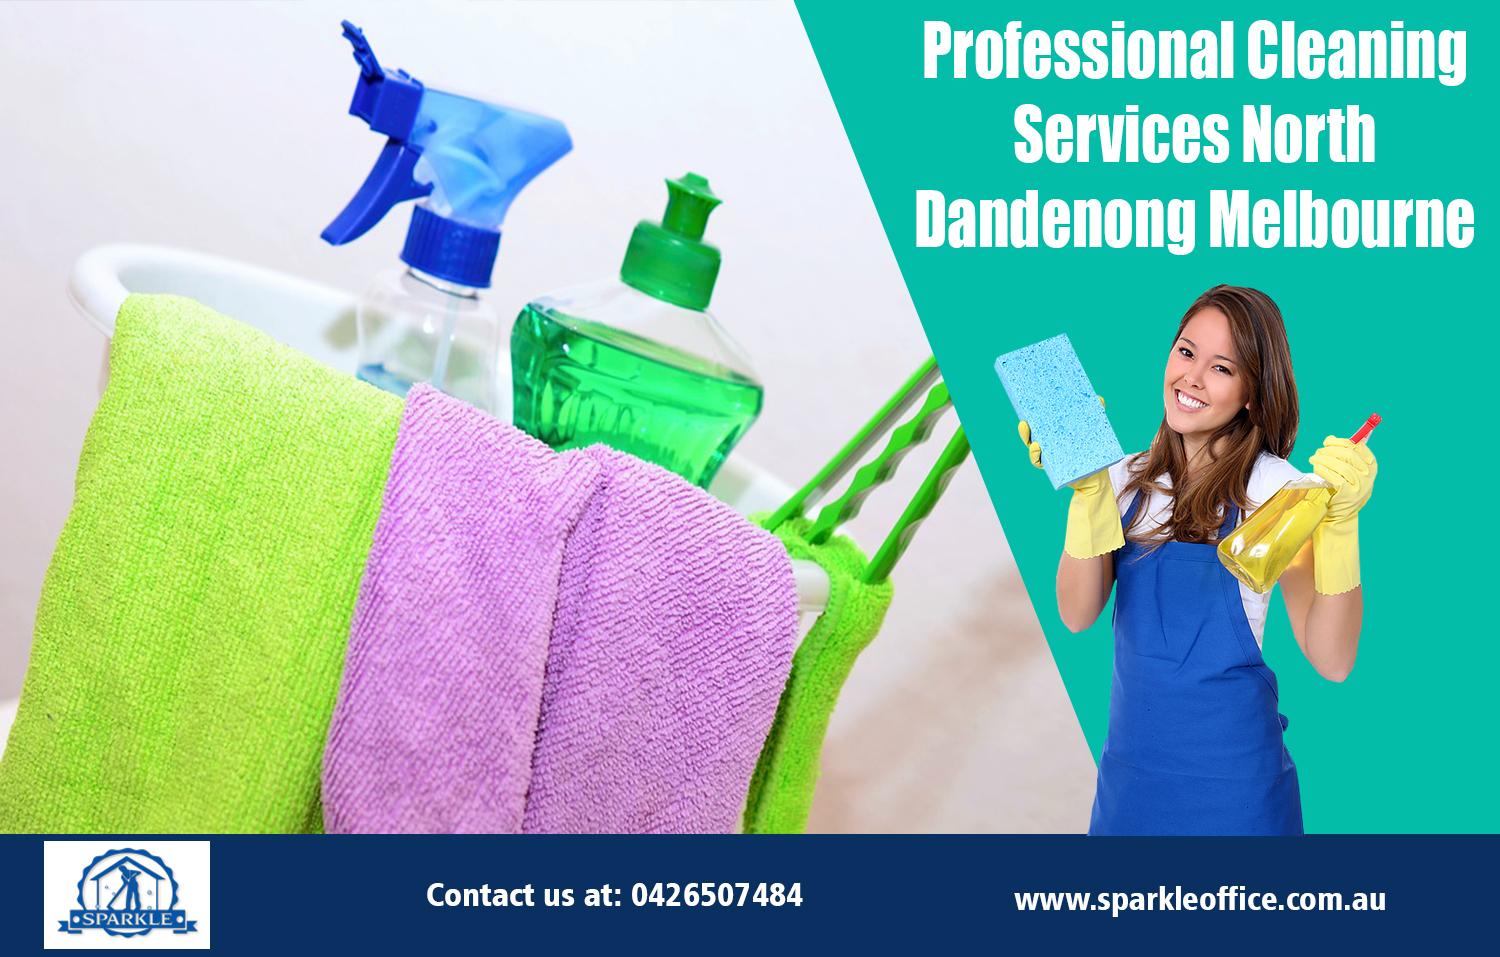 Professional Cleaning Services North Dandenong Melbourne